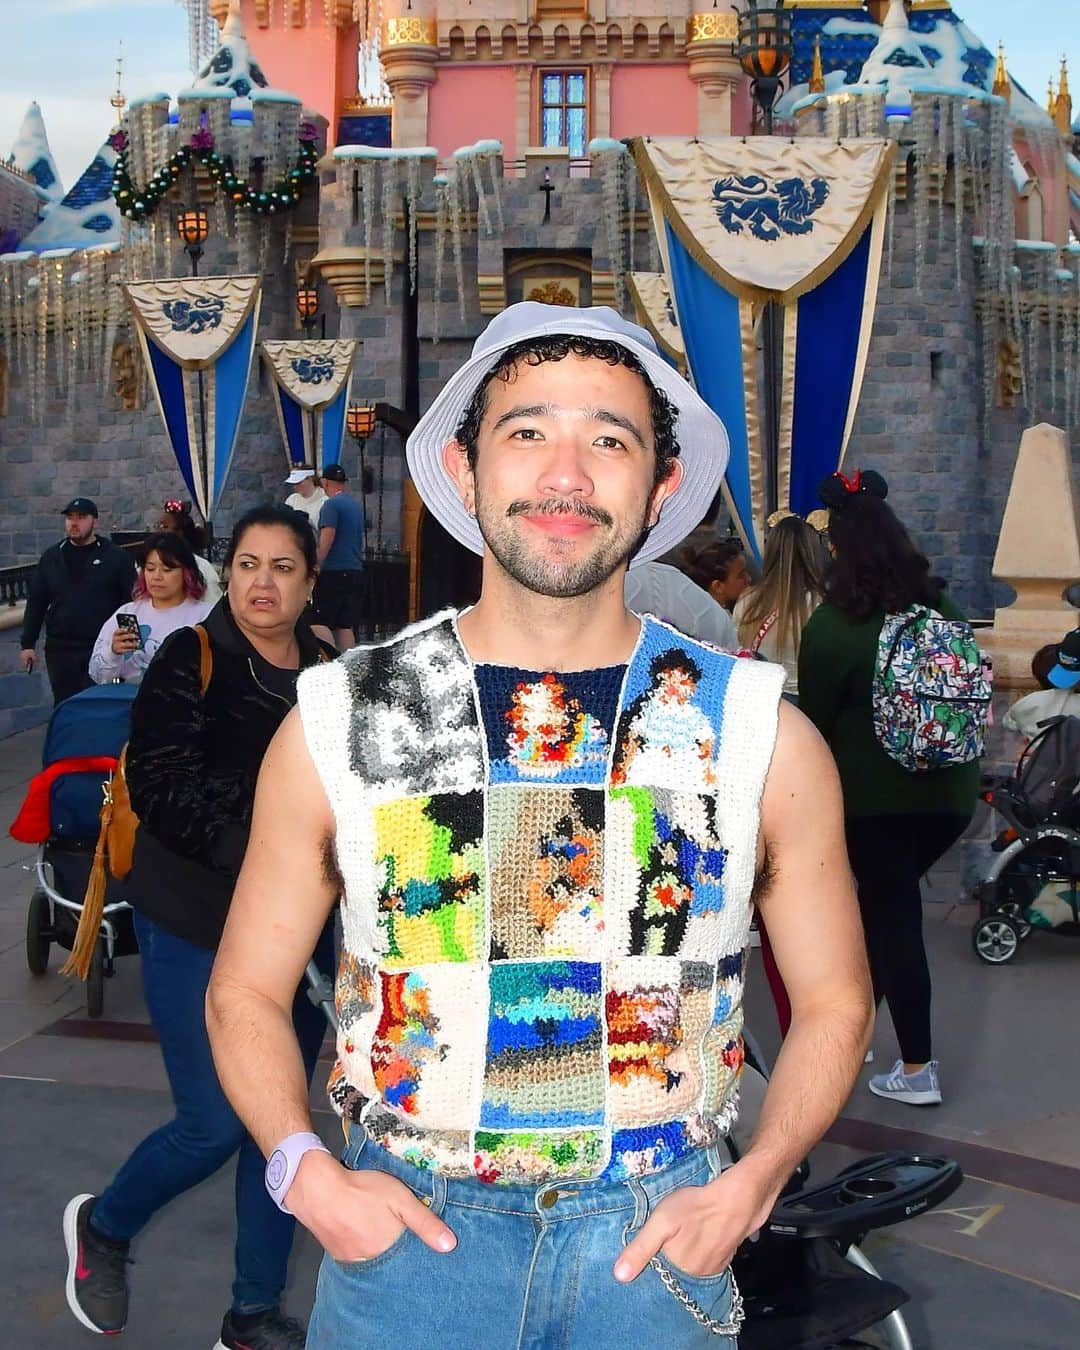 Phil Fergusonのインスタグラム：「SEE MY VEST, SEE MY VEST, MADE FROM REAL crocheted panels, each inspired by a photo from each year of my life leading up to my 30th. Each were stitched together to make a vest that I wore to Disneyland on my actual birthday ❤️  Here’s my completed birthday vest! I definitely would play around with it a bit more but for the purposes of wearing it yesterday, it works!   Thank you to the random photographers who take photos at Disneyland.  Without you, I wouldn’t have any documentation that I ever wore it out!  Fun fact: the bottom two rows were put on upside down accidentally lol  But thank you everyone for your birthday wishes, I appreciated the love and I am excited for what else I do while I’m on holiday!  Hope everyone’s well x」